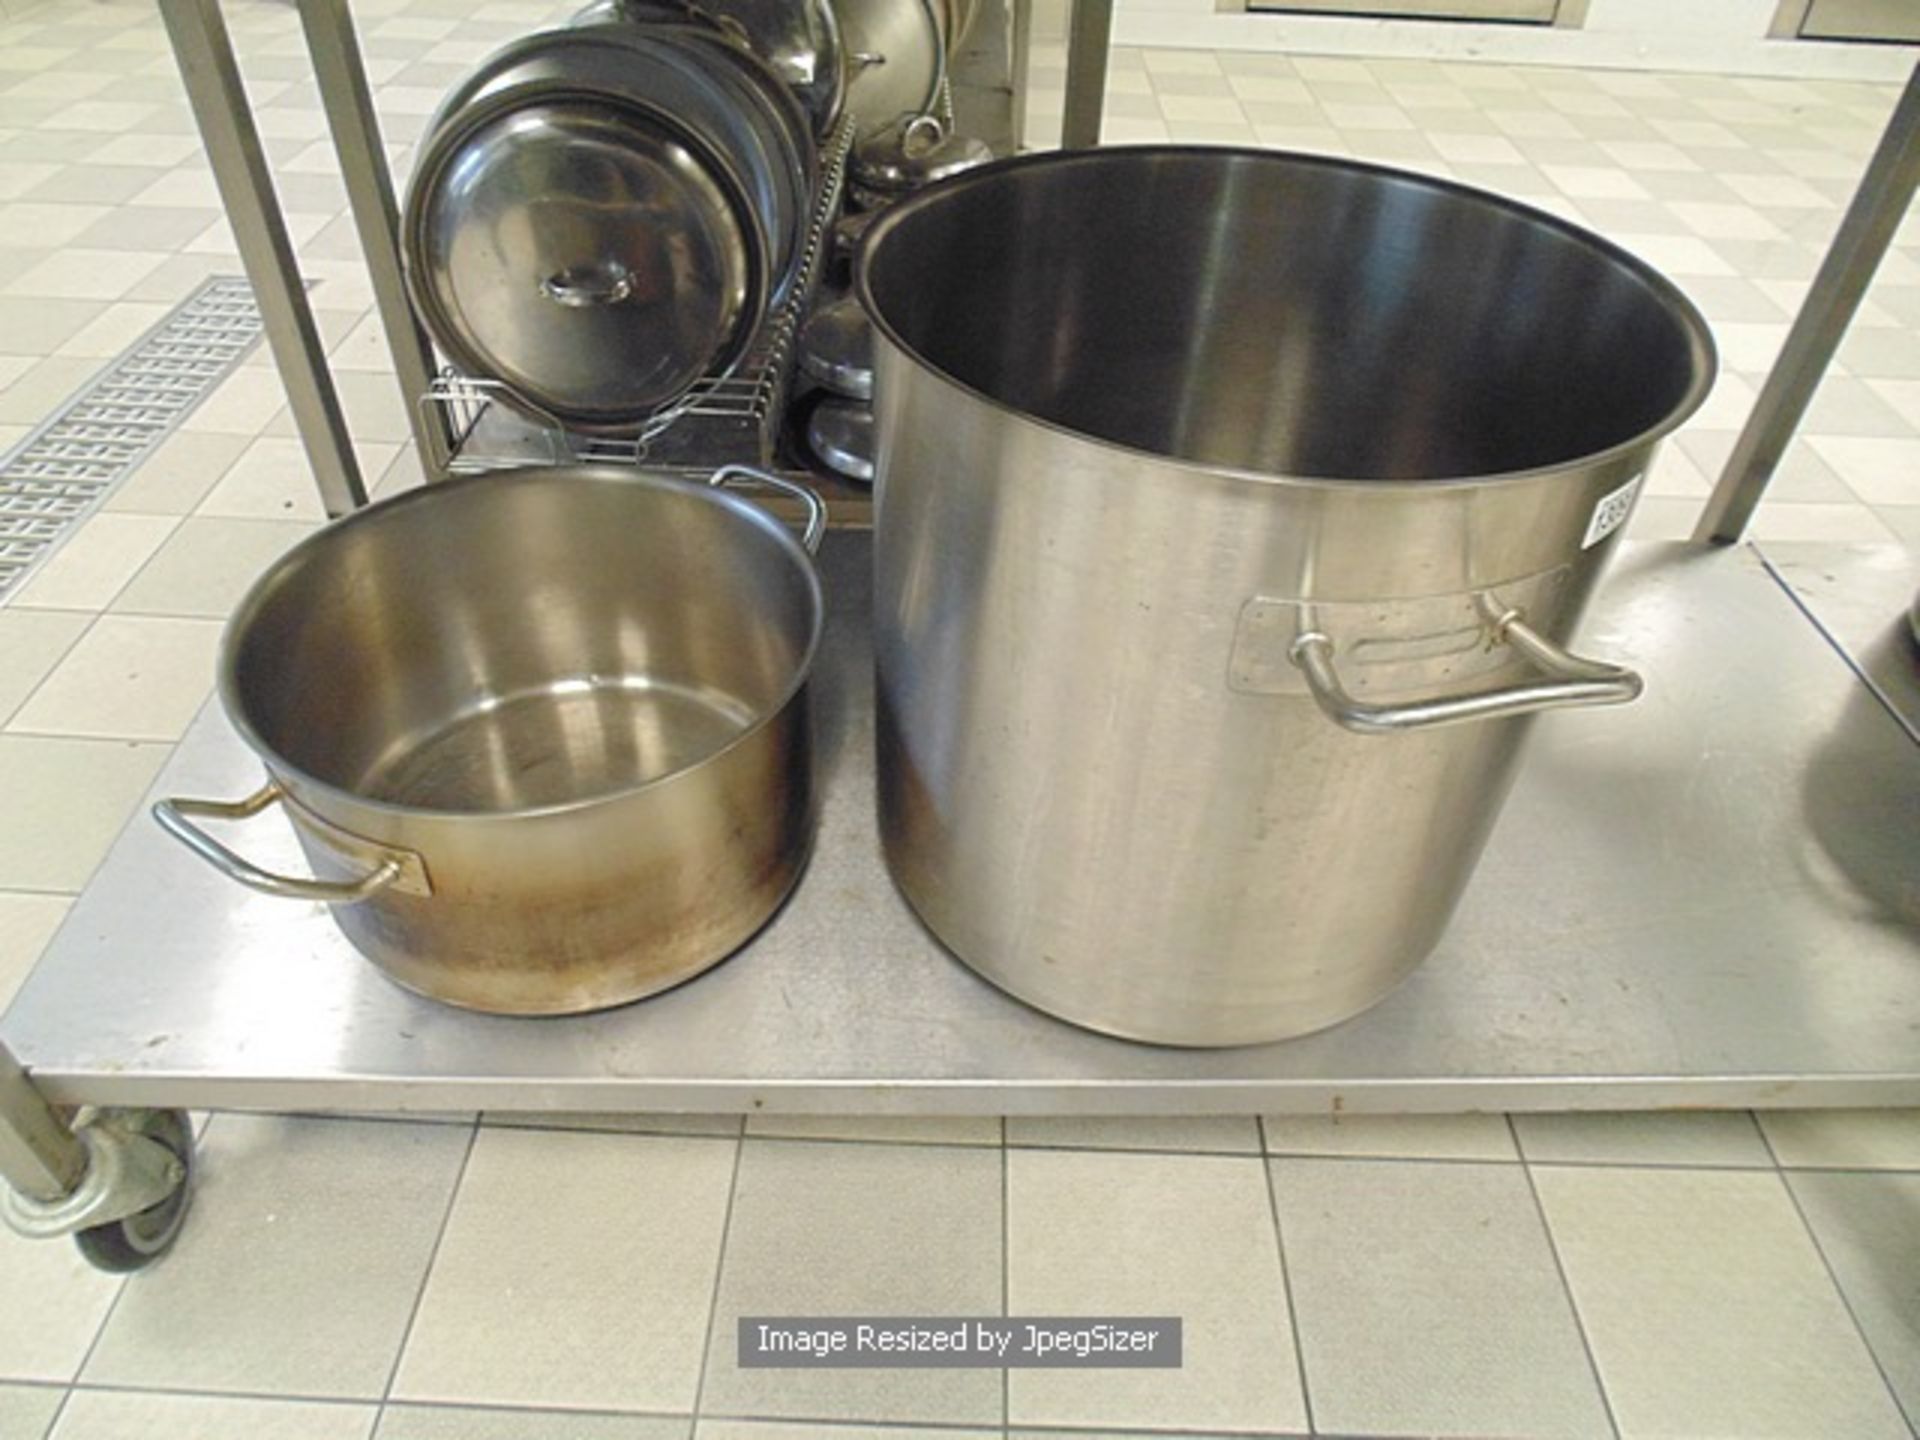 2 x Lagor stainless steel commercial stock pots 1 x 56 litre capacity 420mm x 410mm 1 x 18 litre